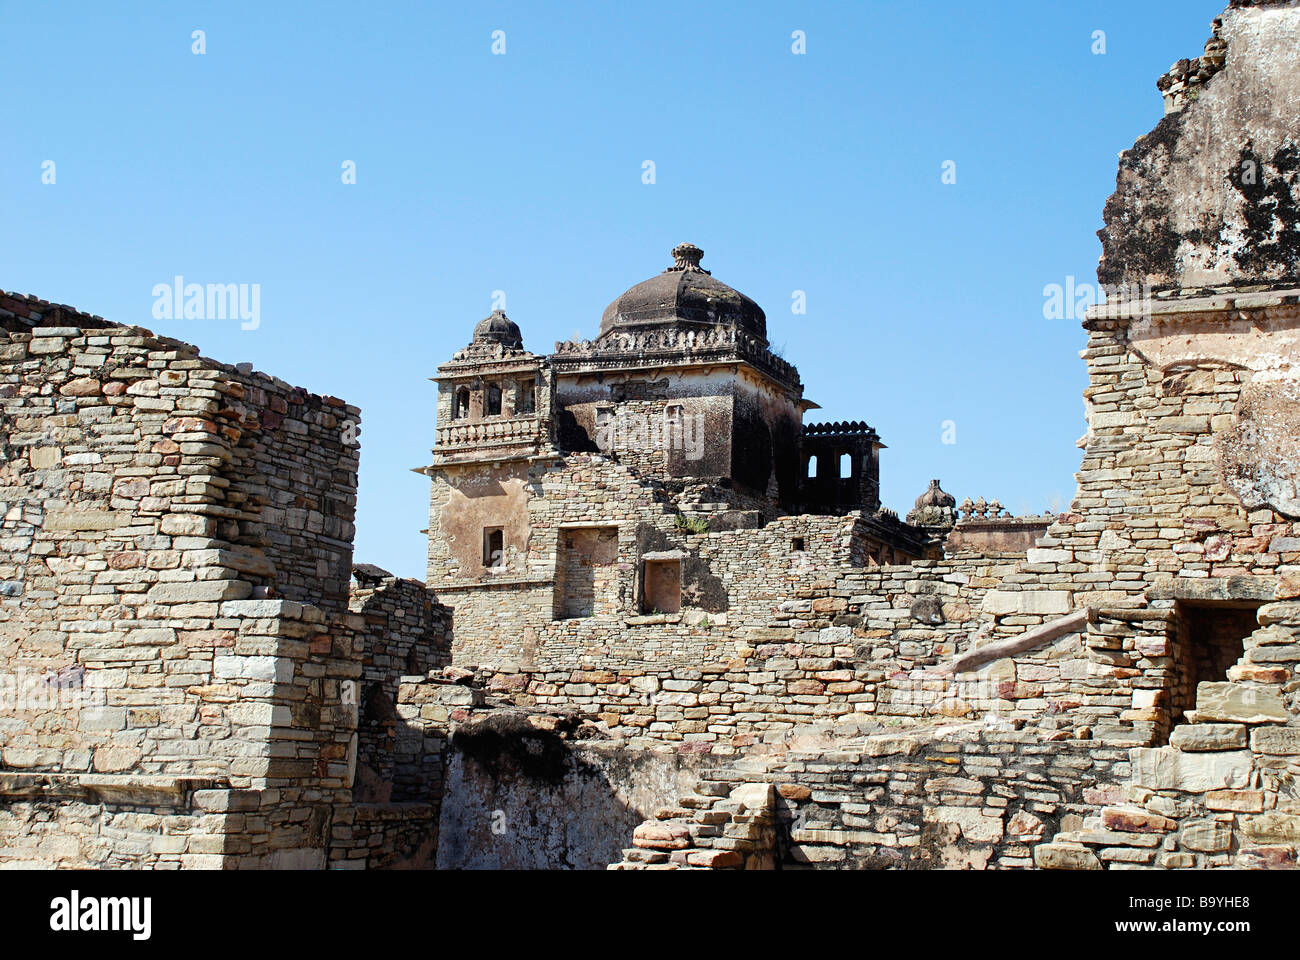 Chittorgarh fort, situated on South Eastern plateau of Aravali mountain ranges,  Rajasthan State, India Stock Photo